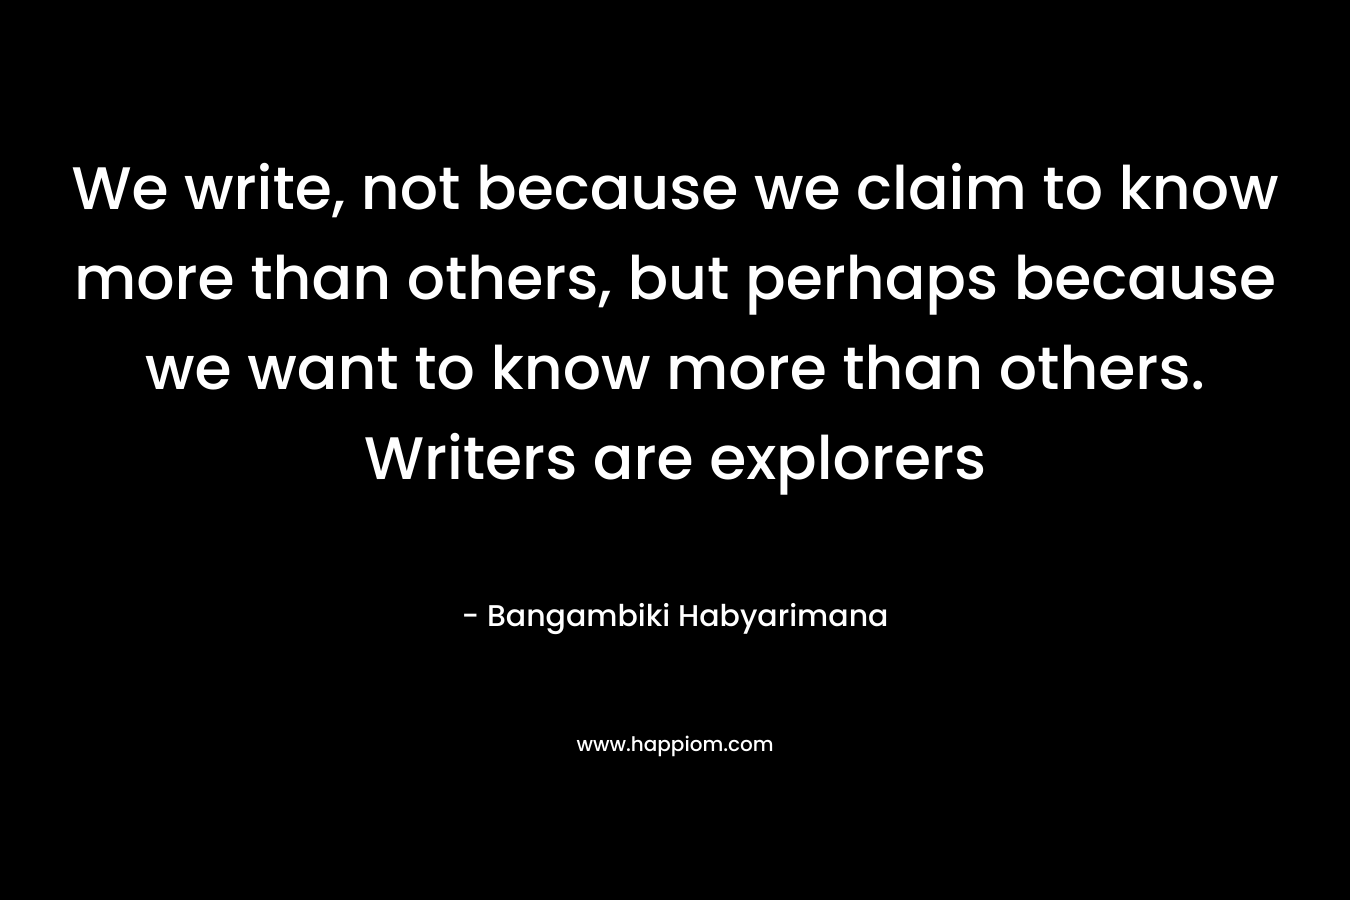 We write, not because we claim to know more than others, but perhaps because we want to know more than others. Writers are explorers